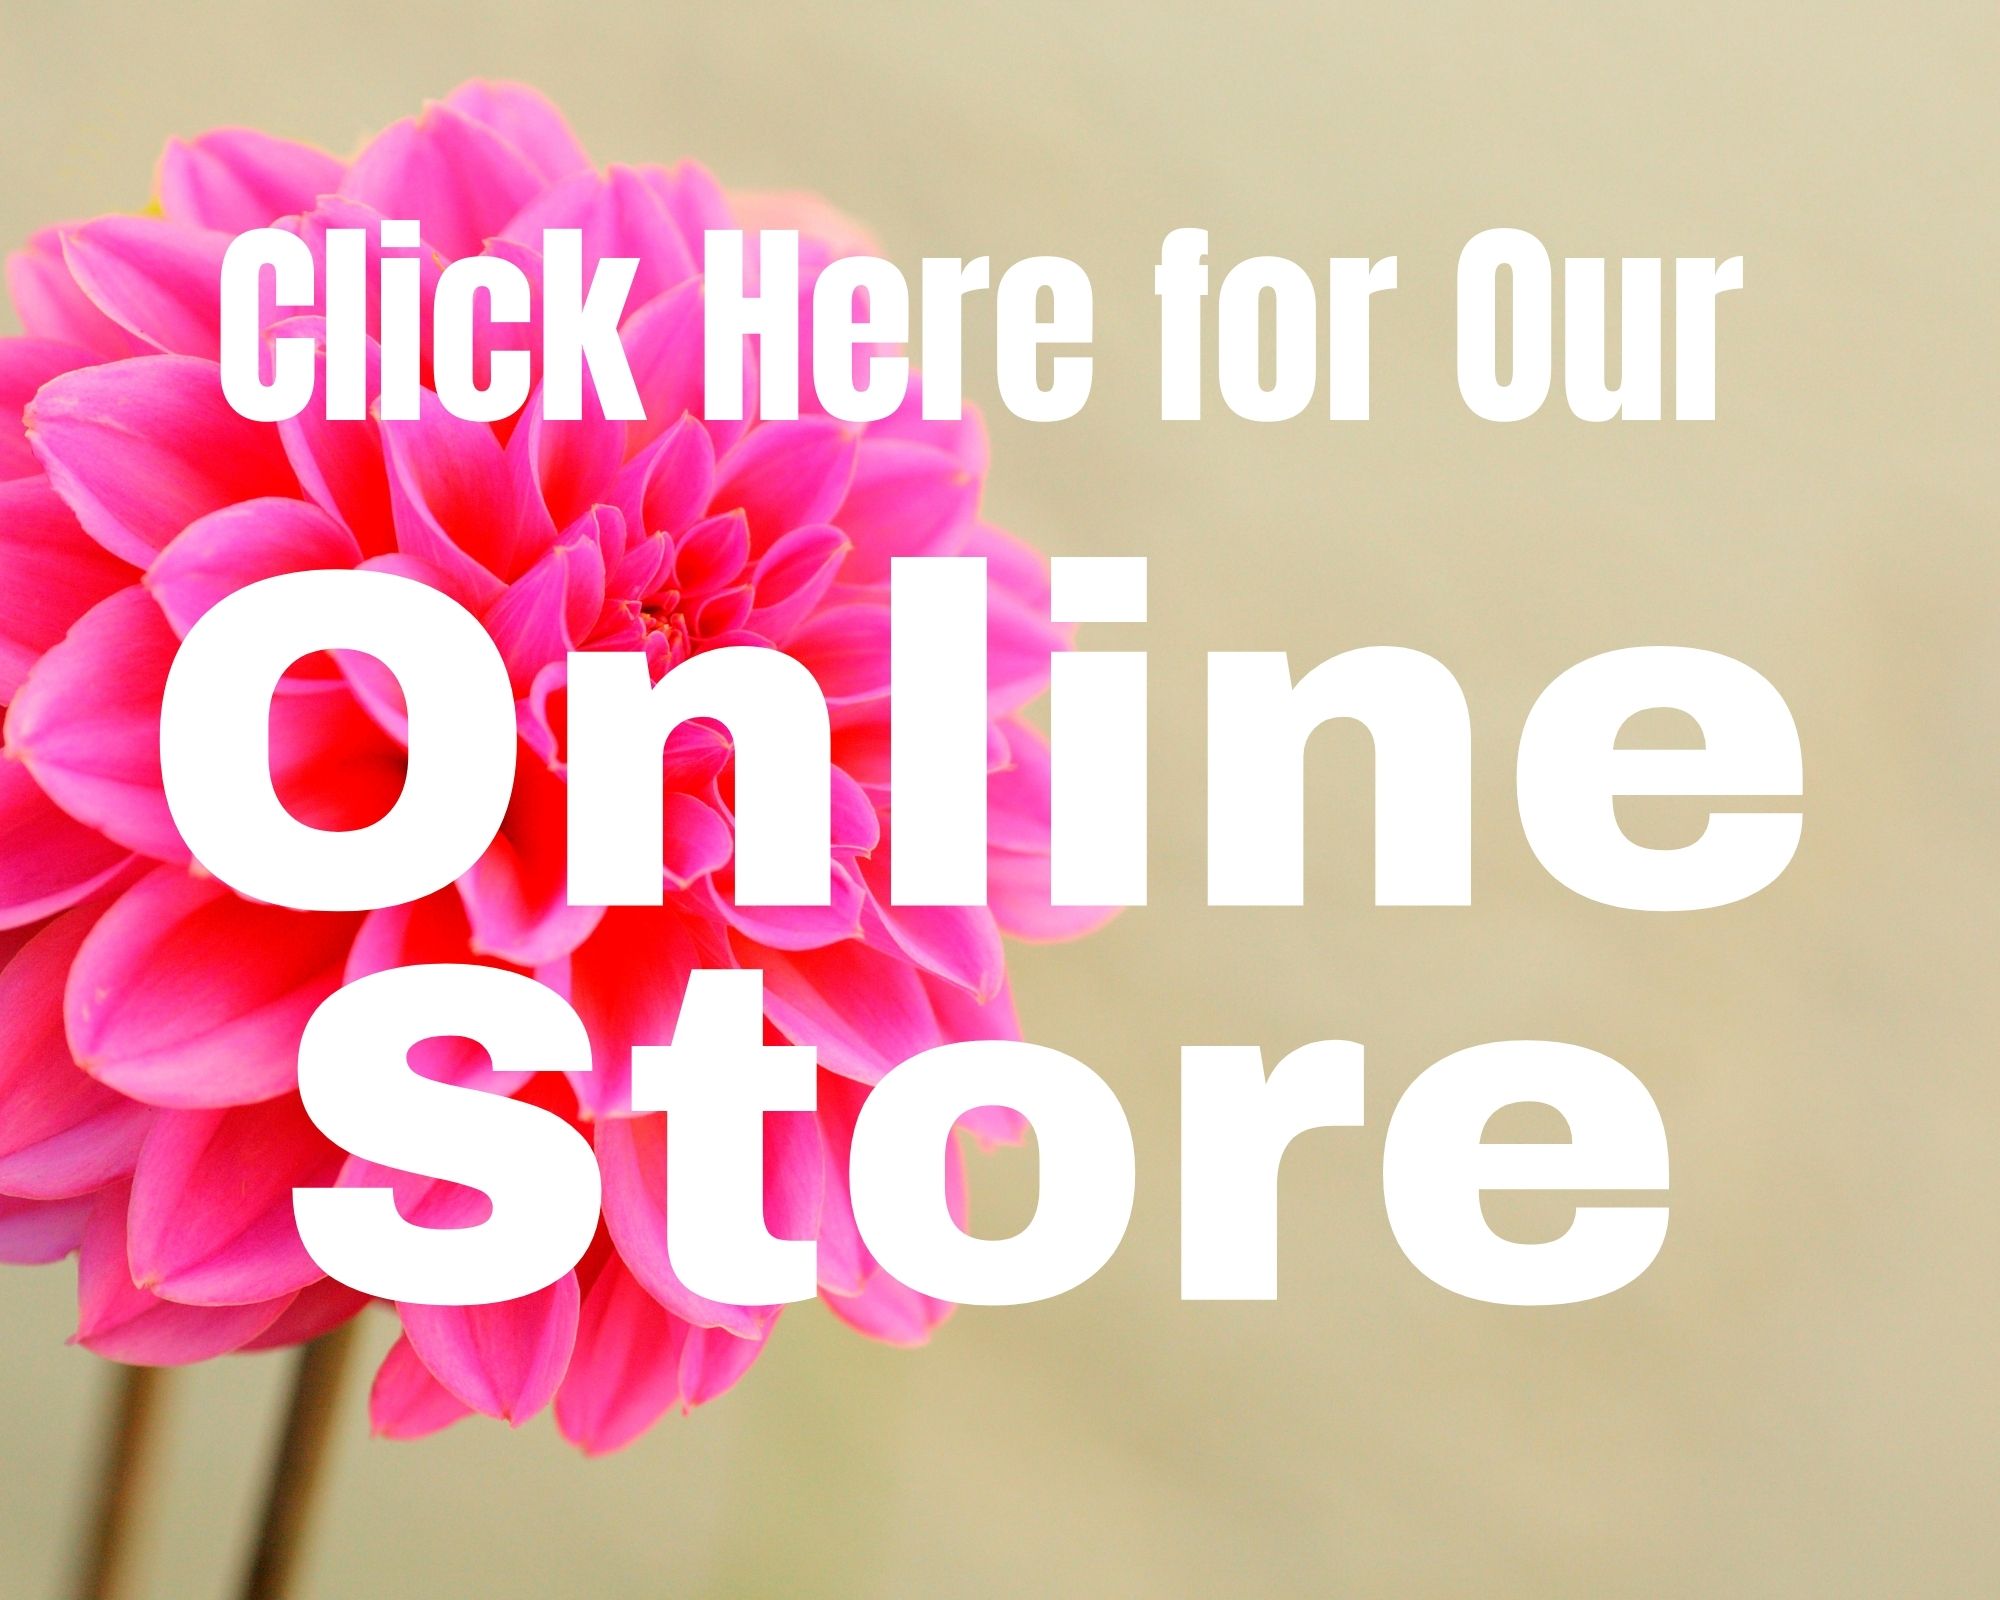 Click here for our online store